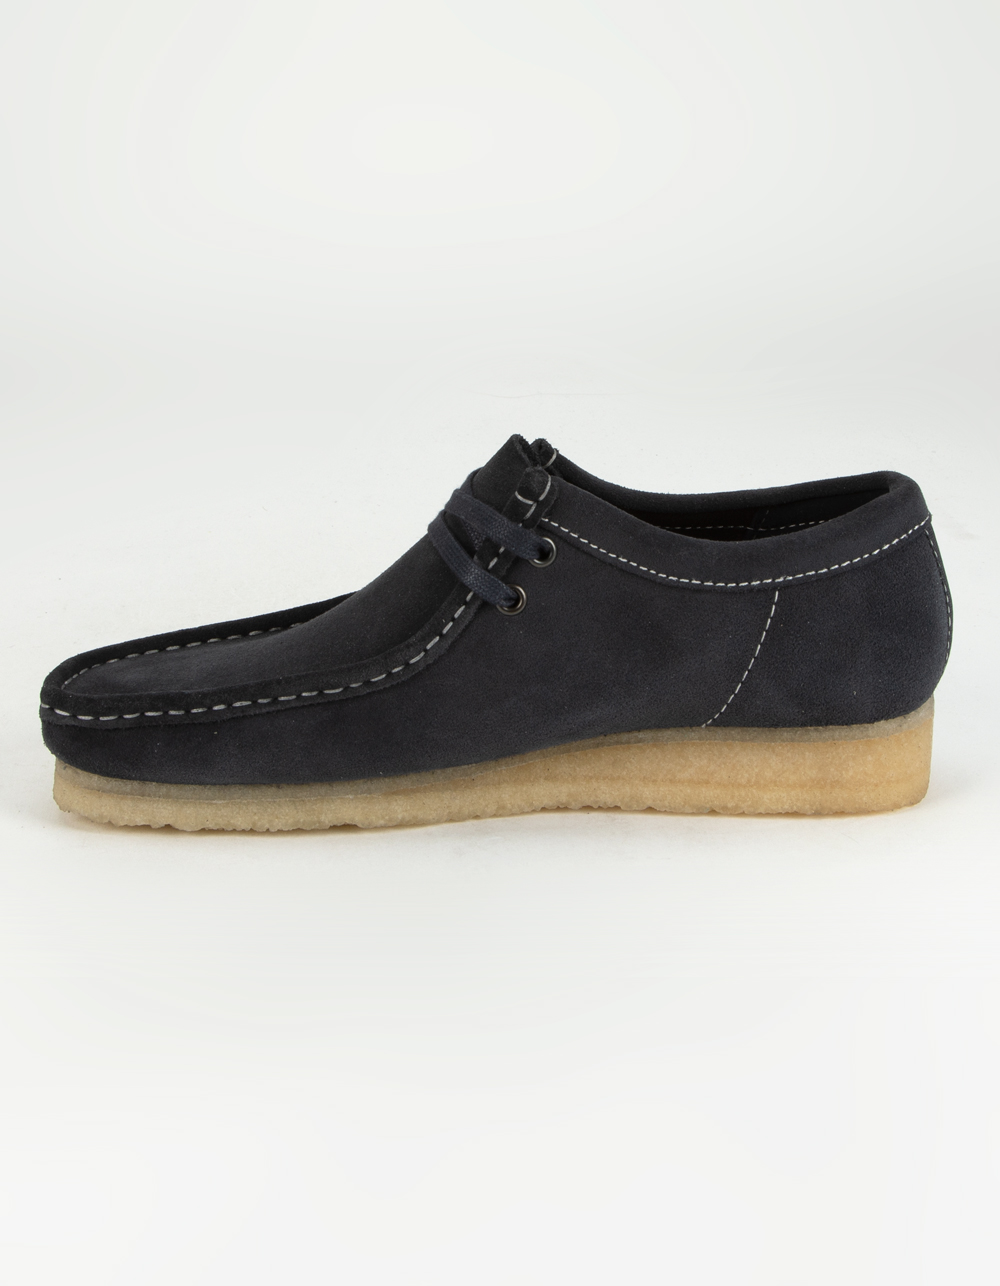 Wallabee Mens Shoes - CHARCOAL | Tillys